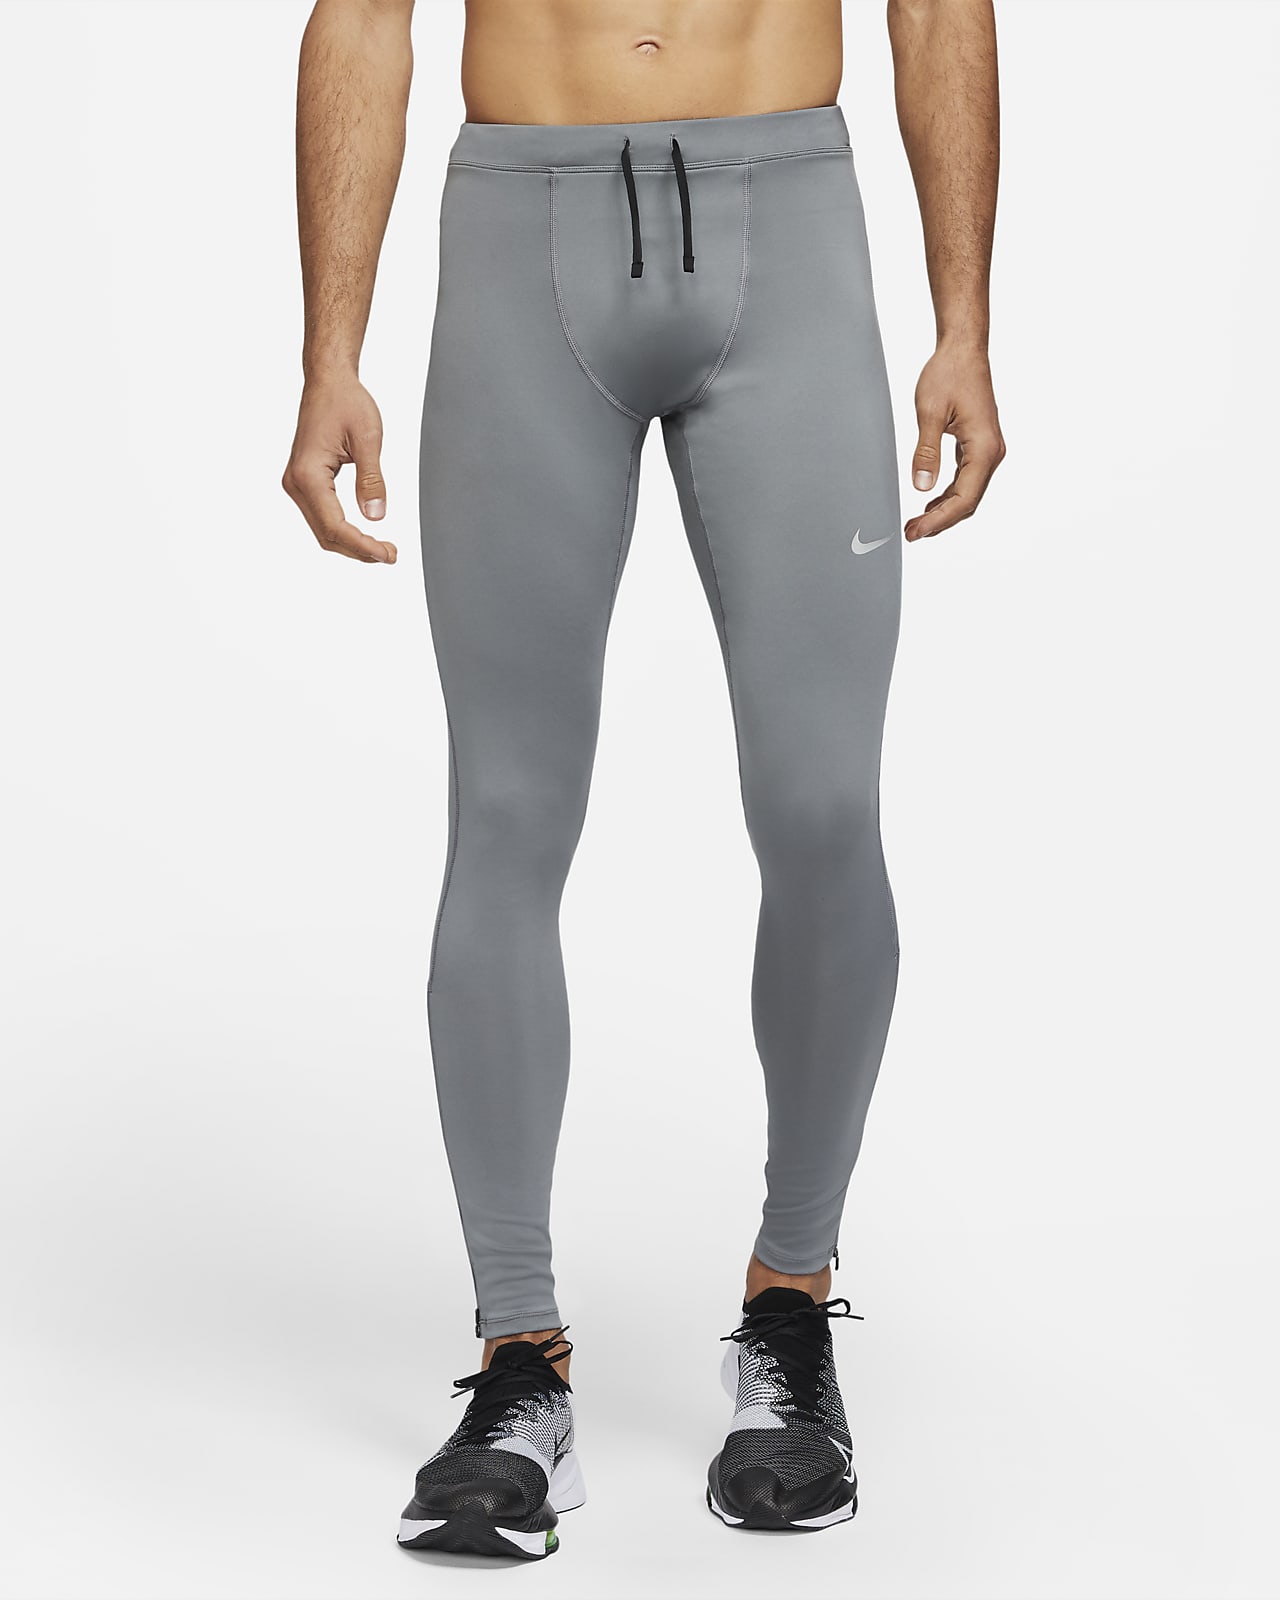 Tanzania shear Counting insects Nike Dri-FIT Challenger Men's Running Tights. Nike.com